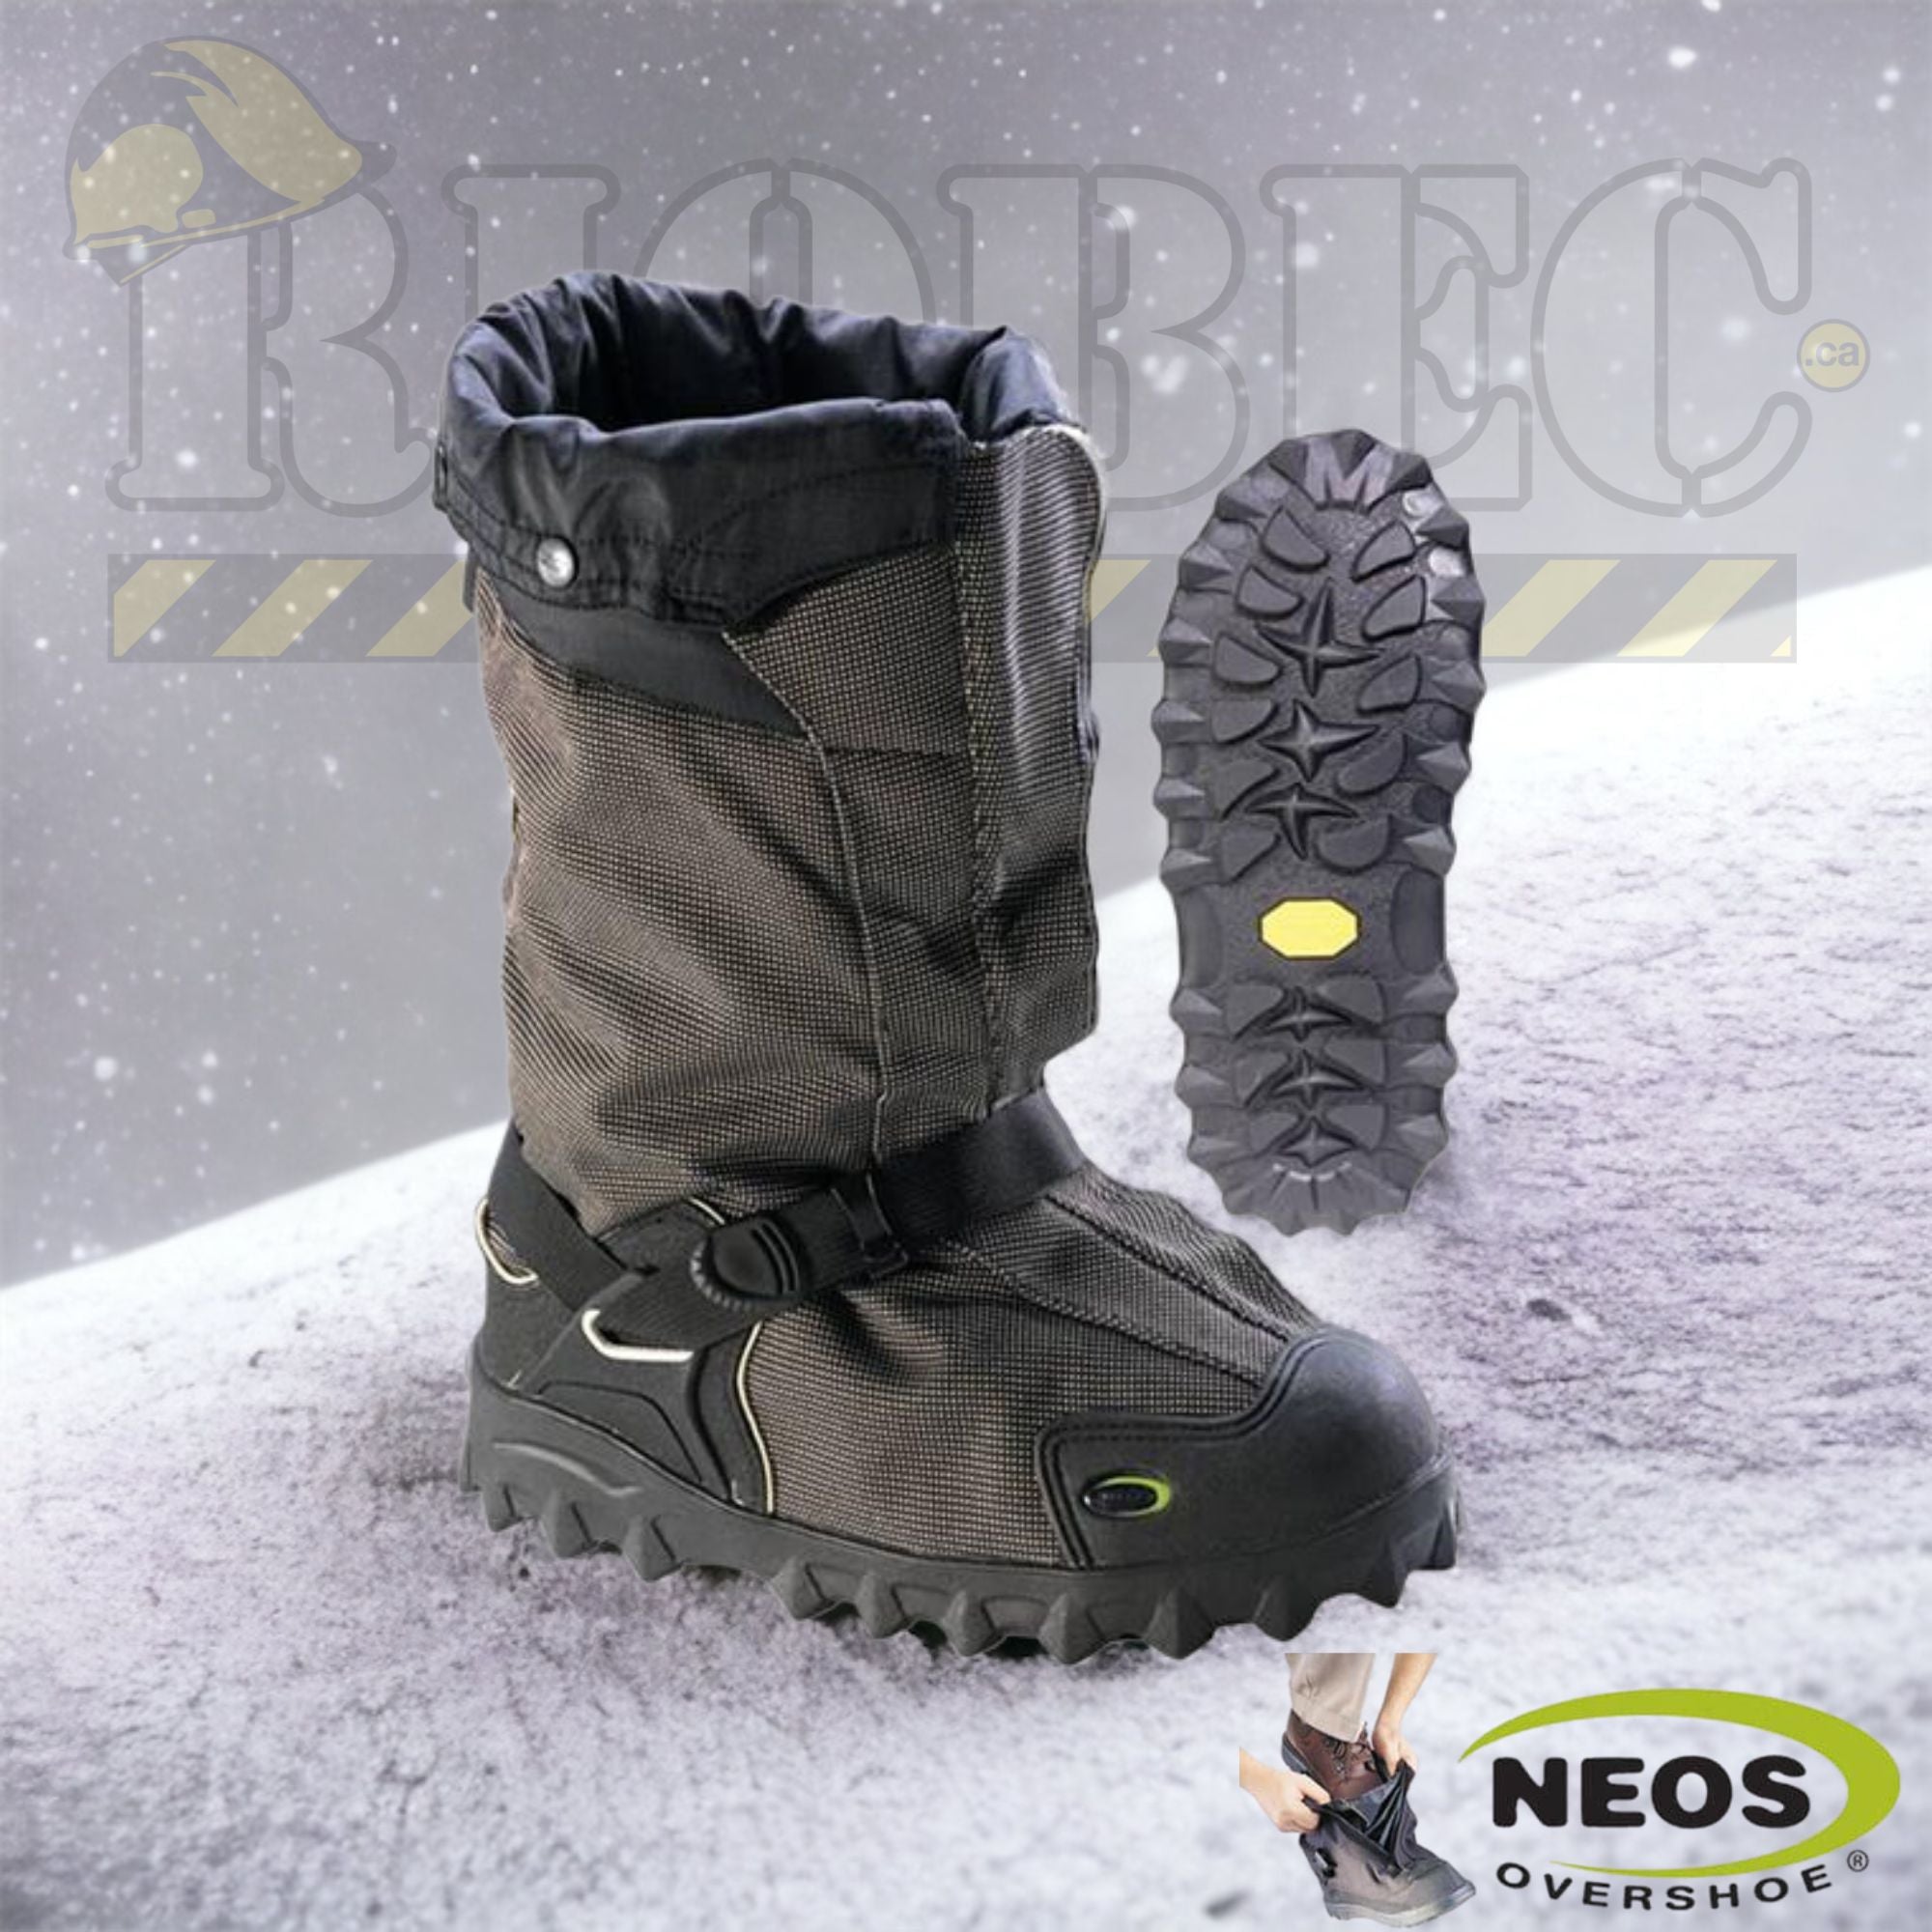 Doublé neos covers (with or without crampons)